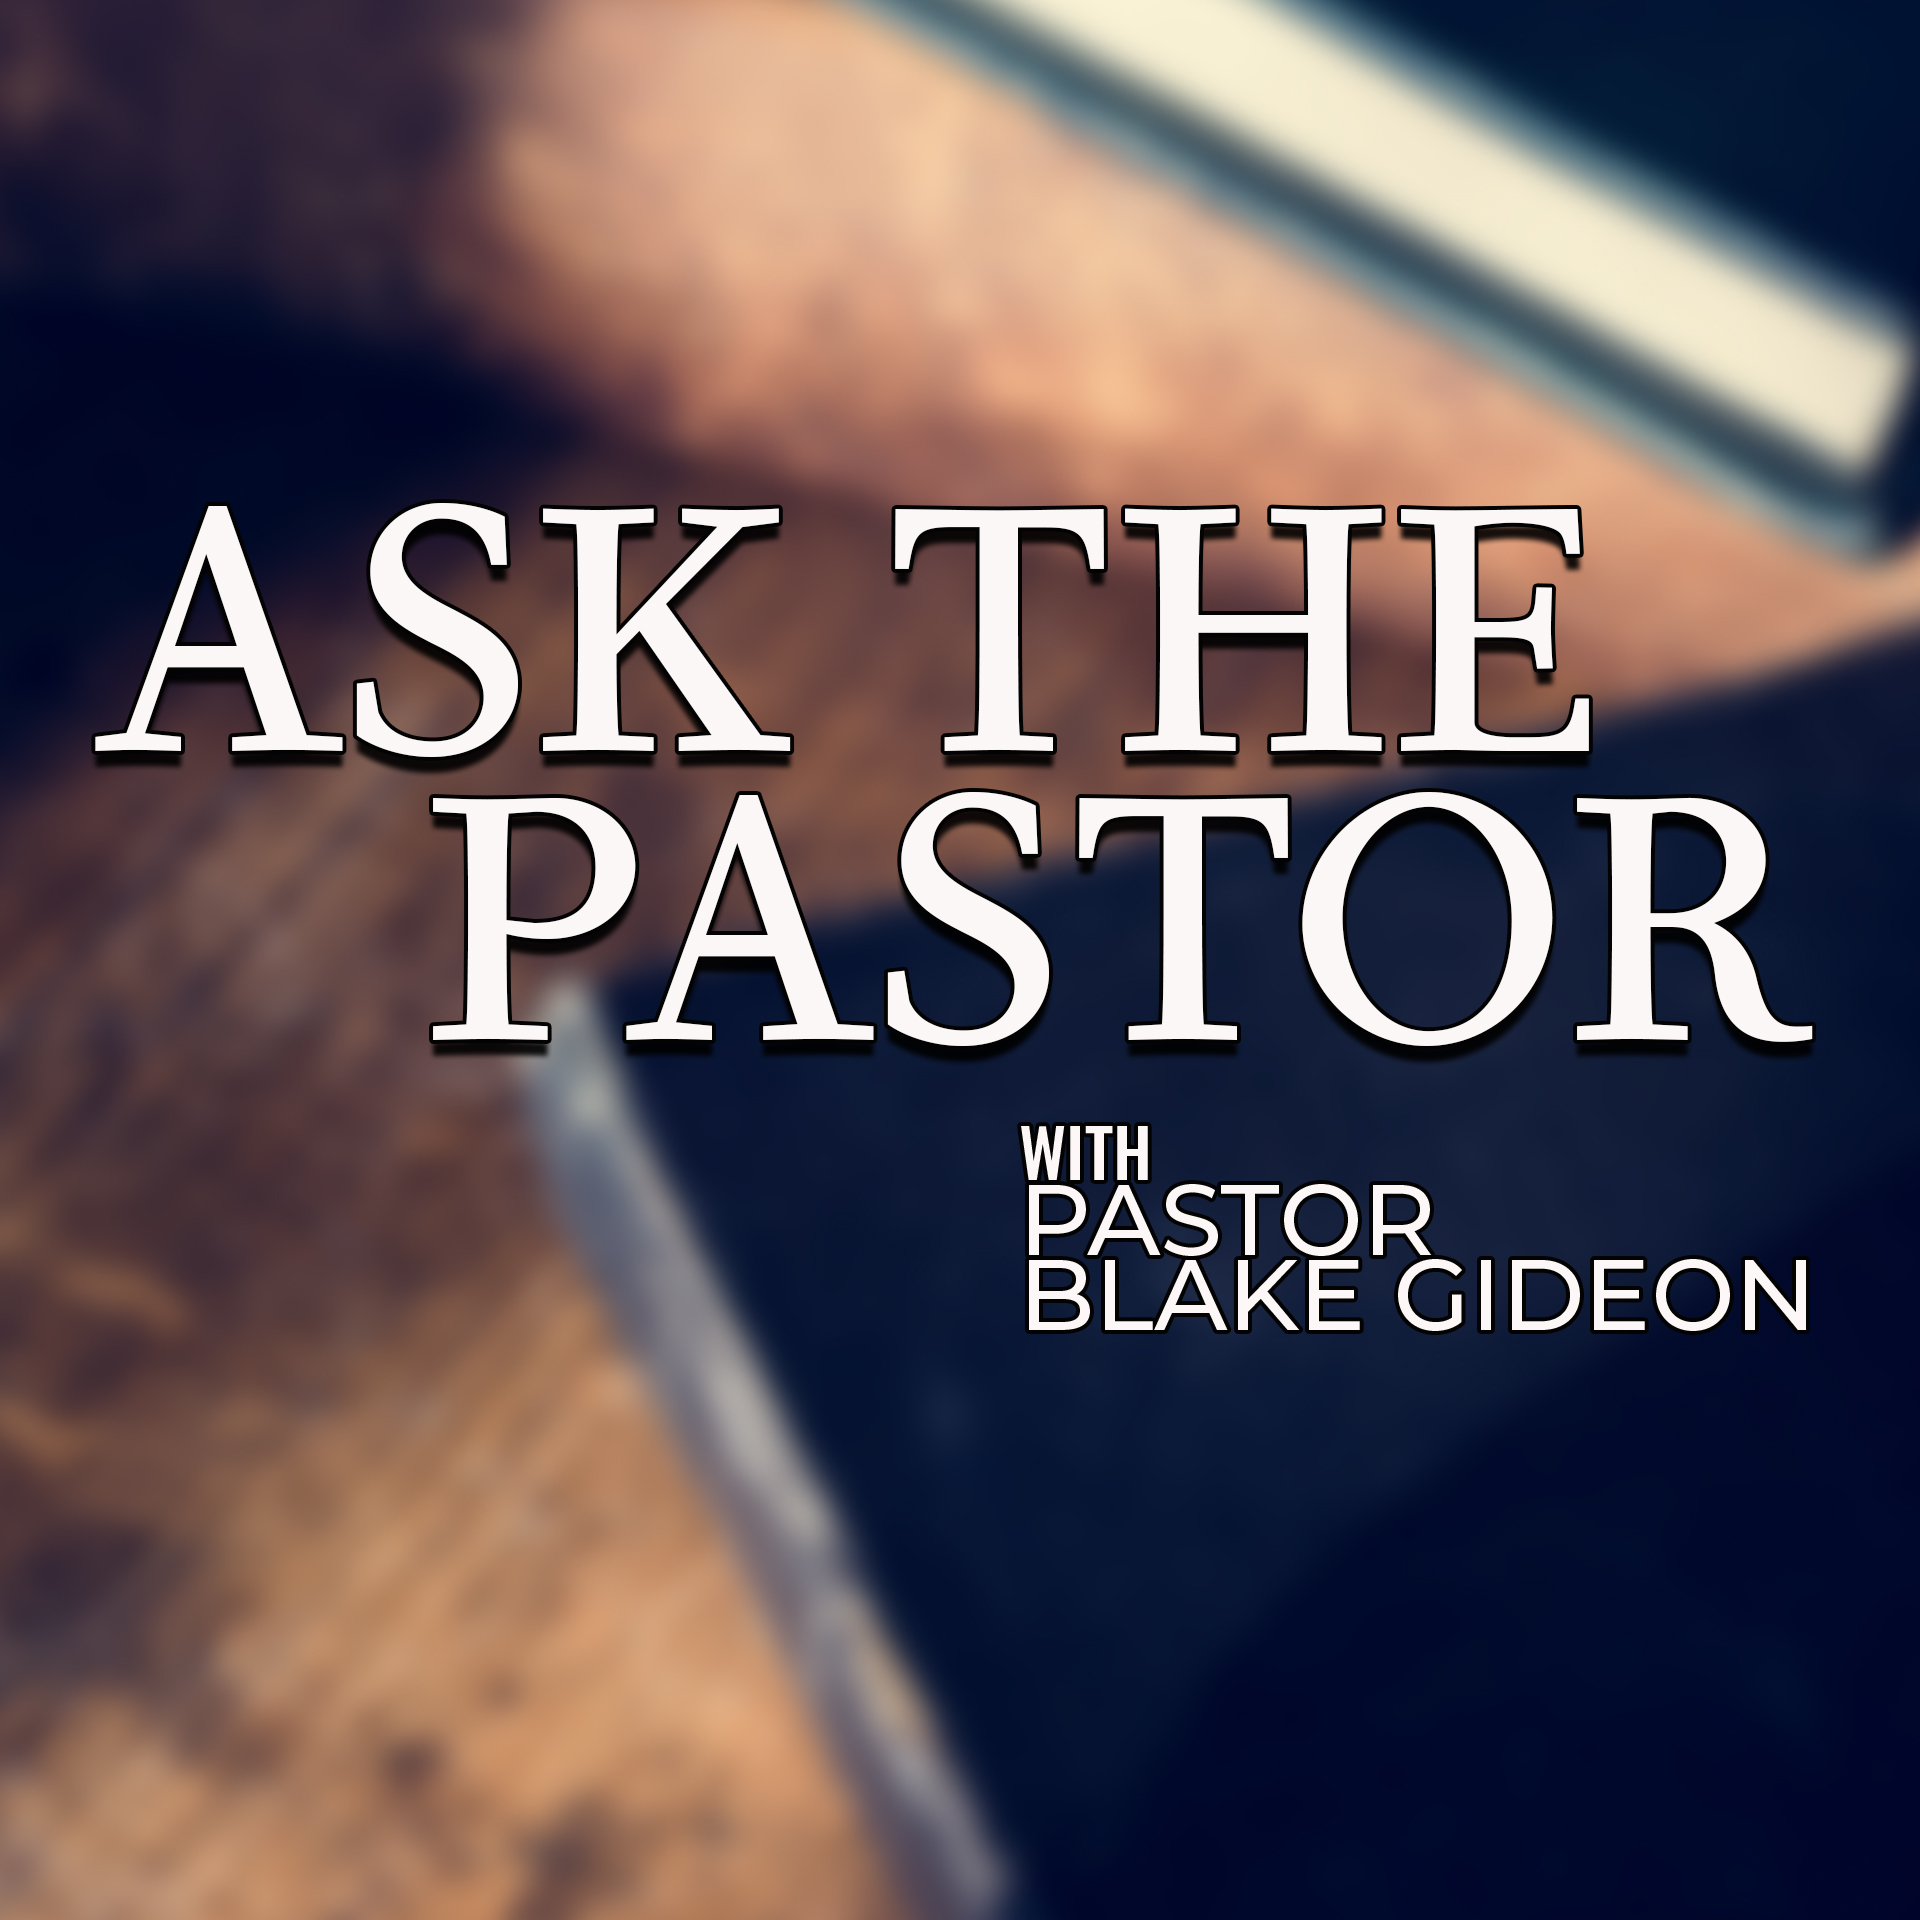 Ask the Pastor, October 20, 2020